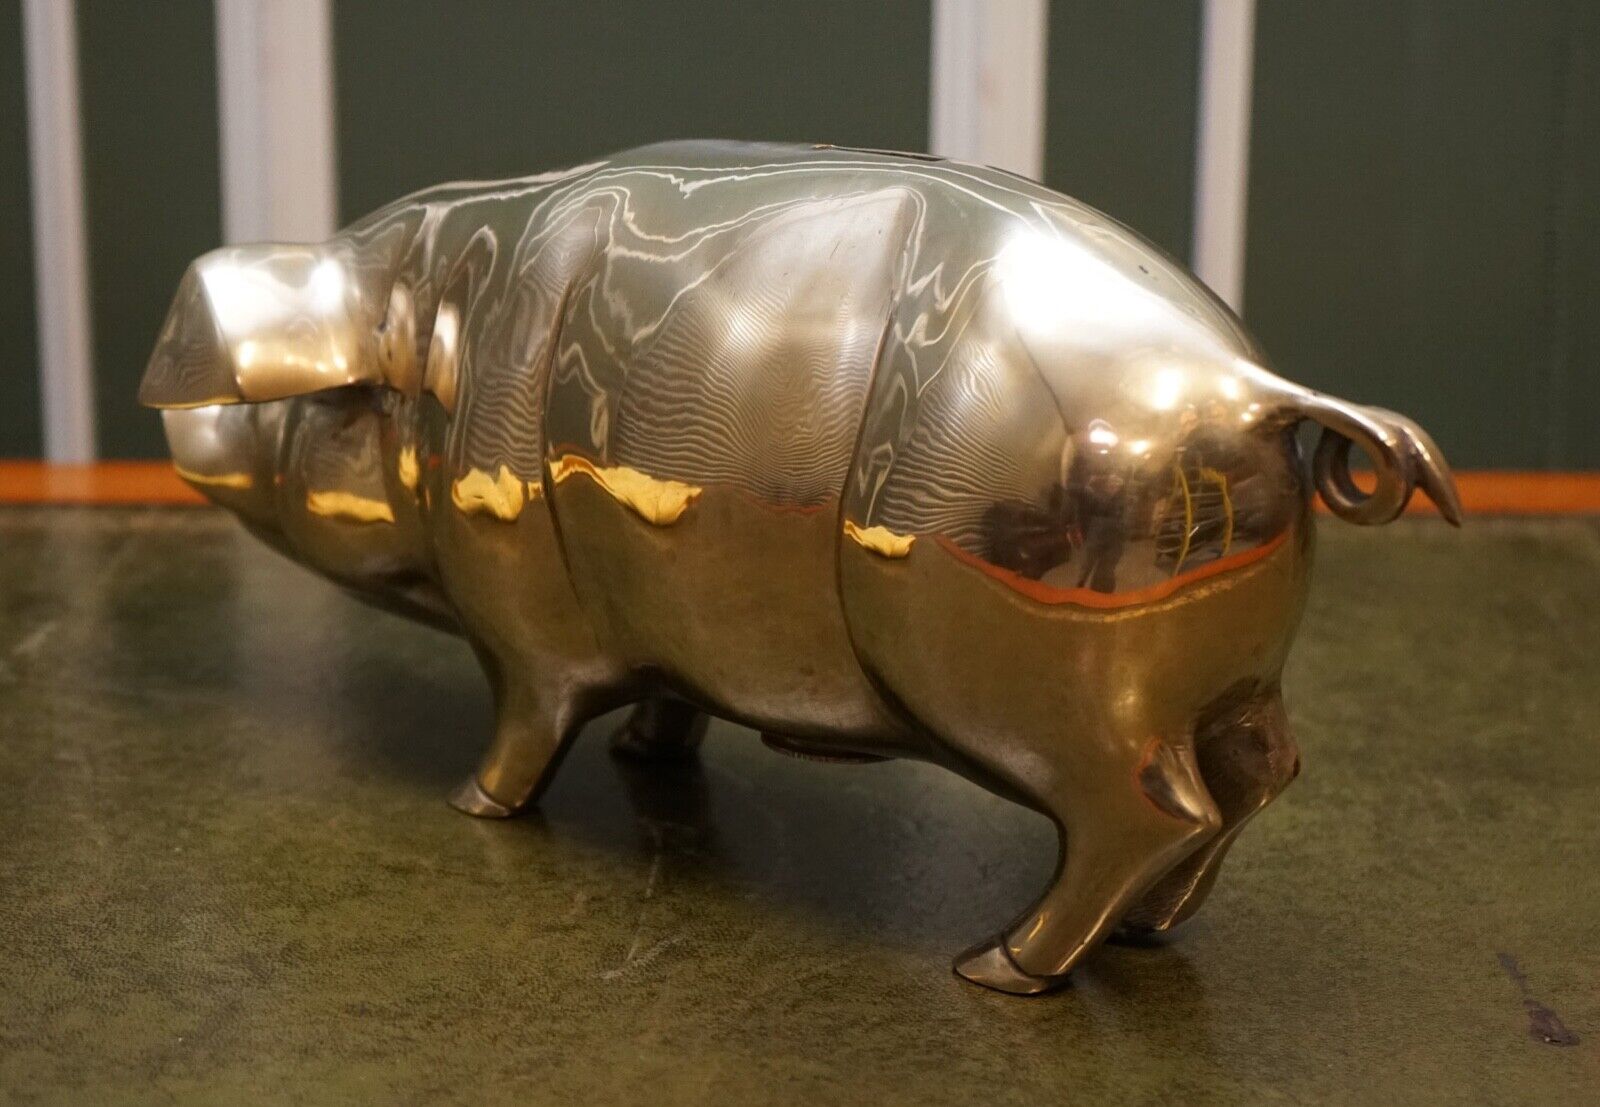 EXQUISITE EARLY 20TH CENTURY BRASS PIGGY BANK